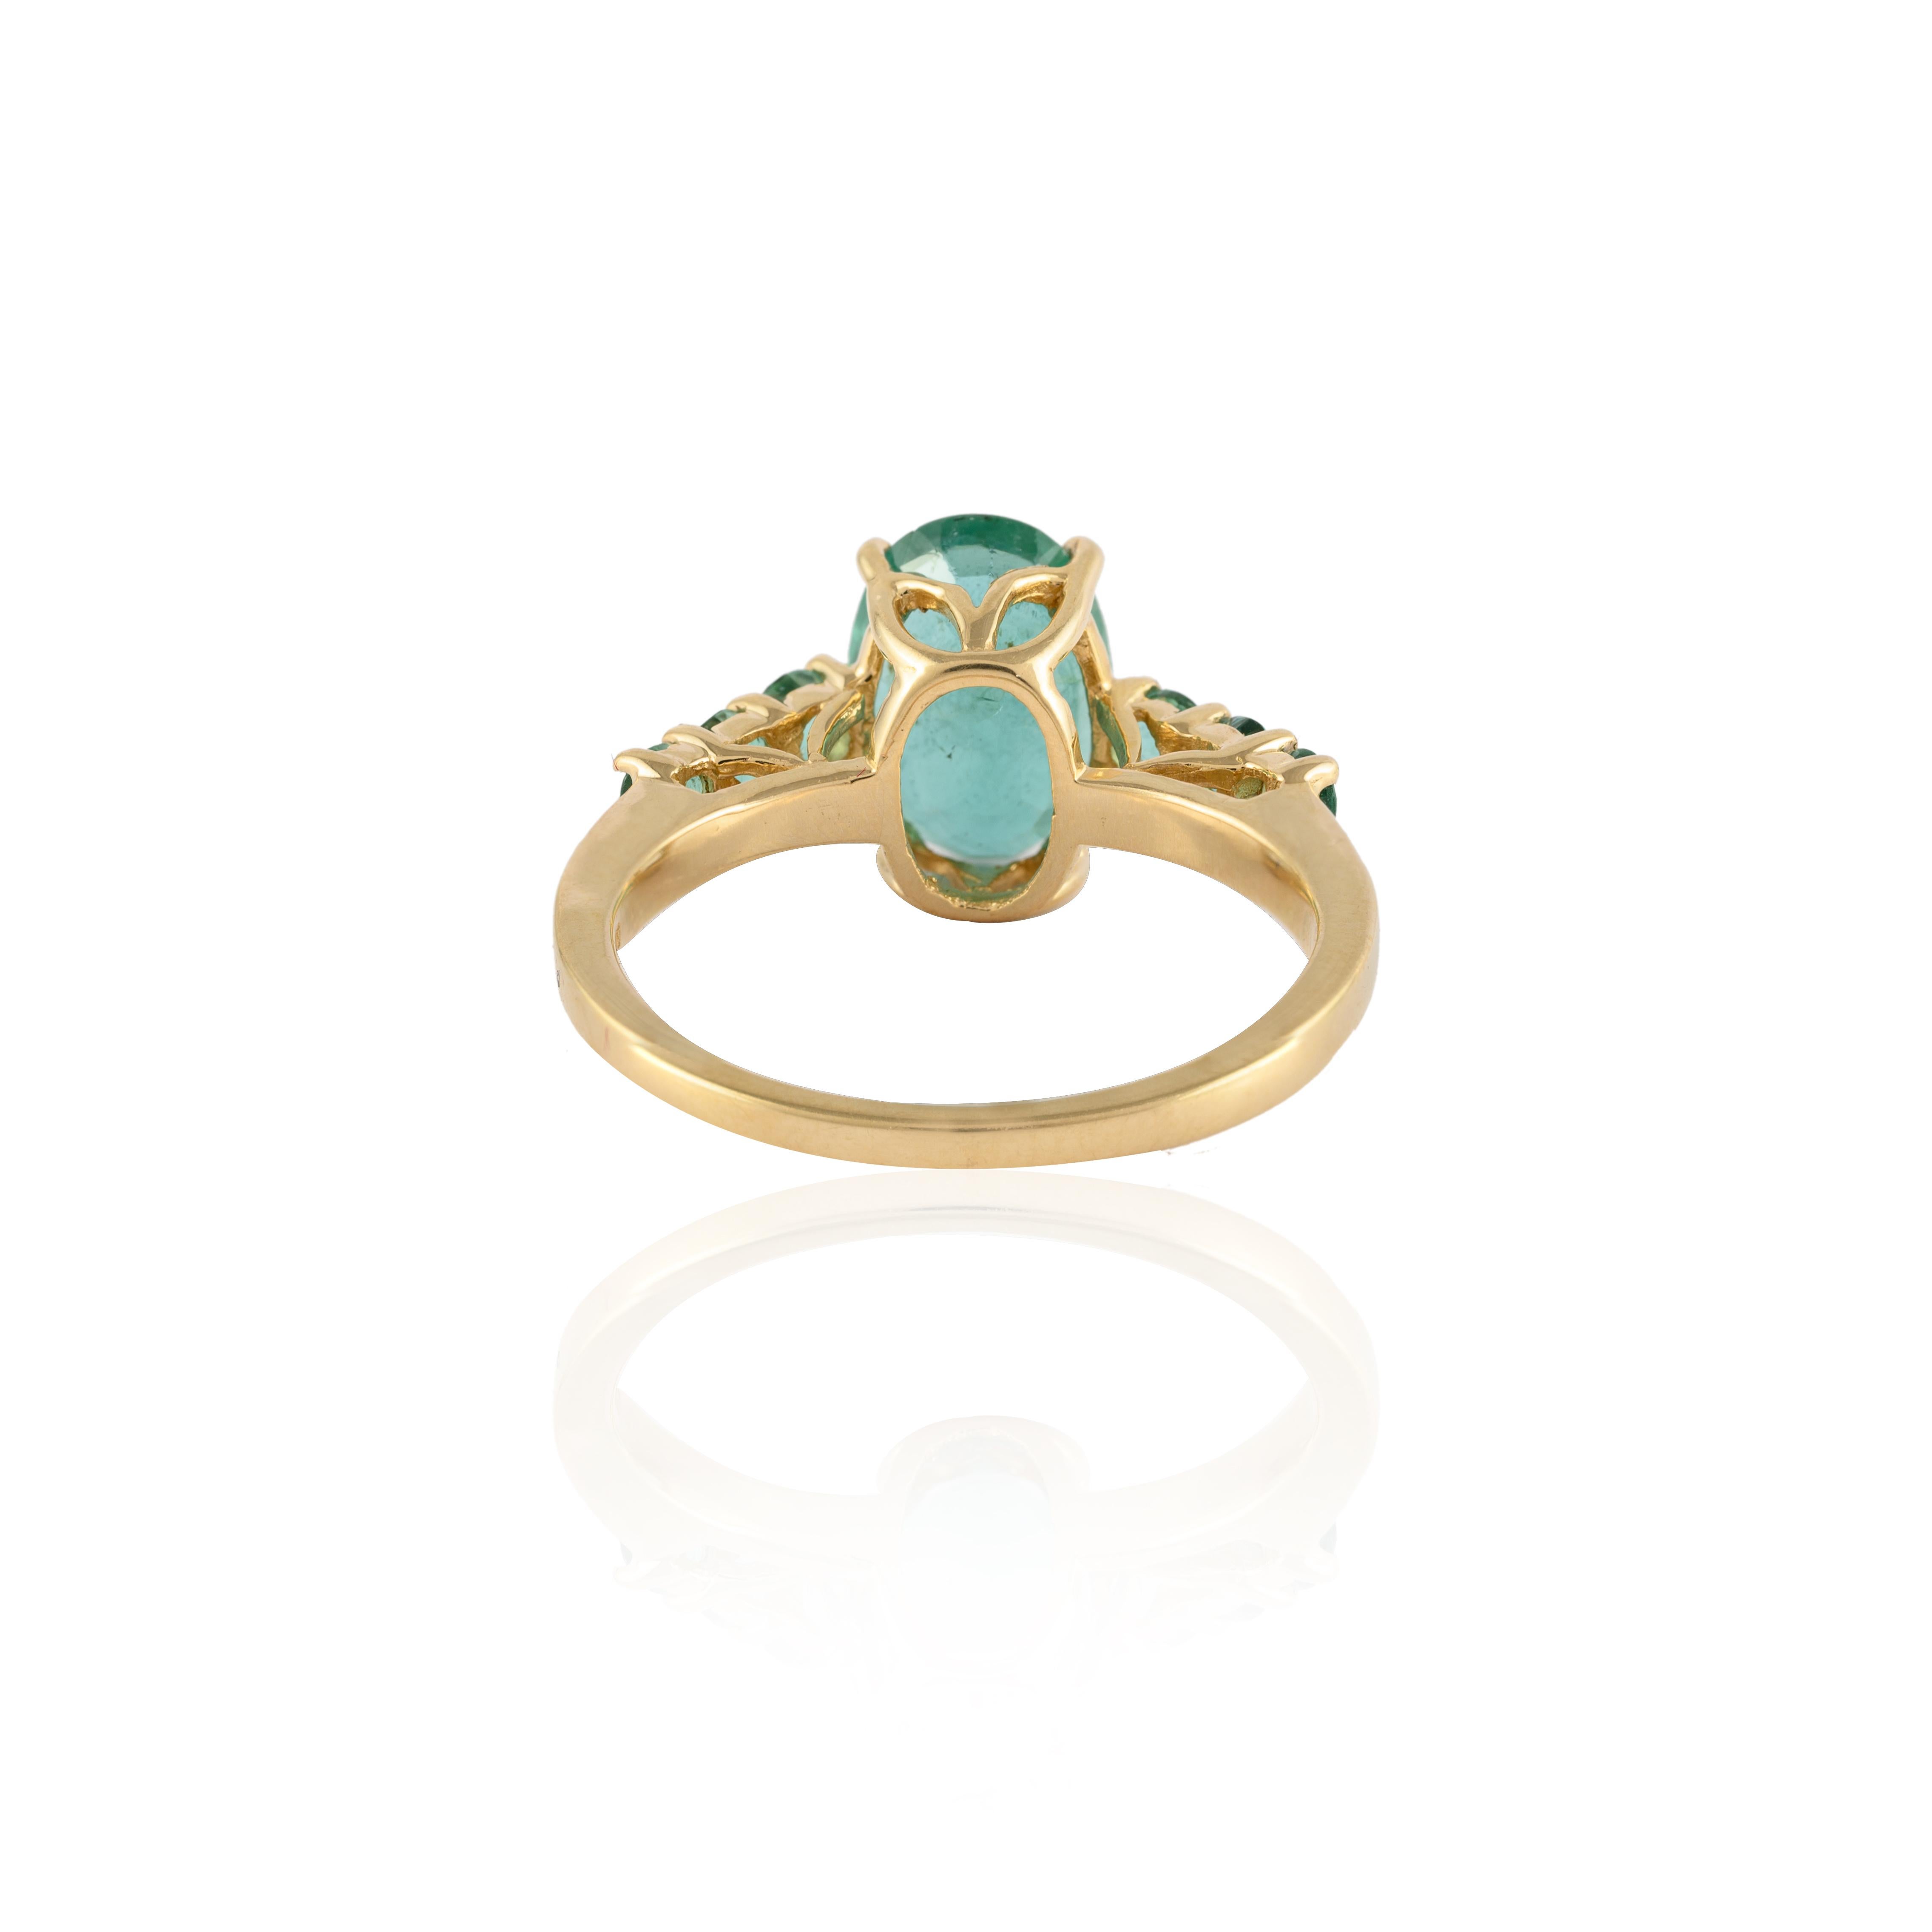 For Sale:  3.09 Carat Genuine Emerald Ring Handcrafted in 14k Solid Yellow Gold 4